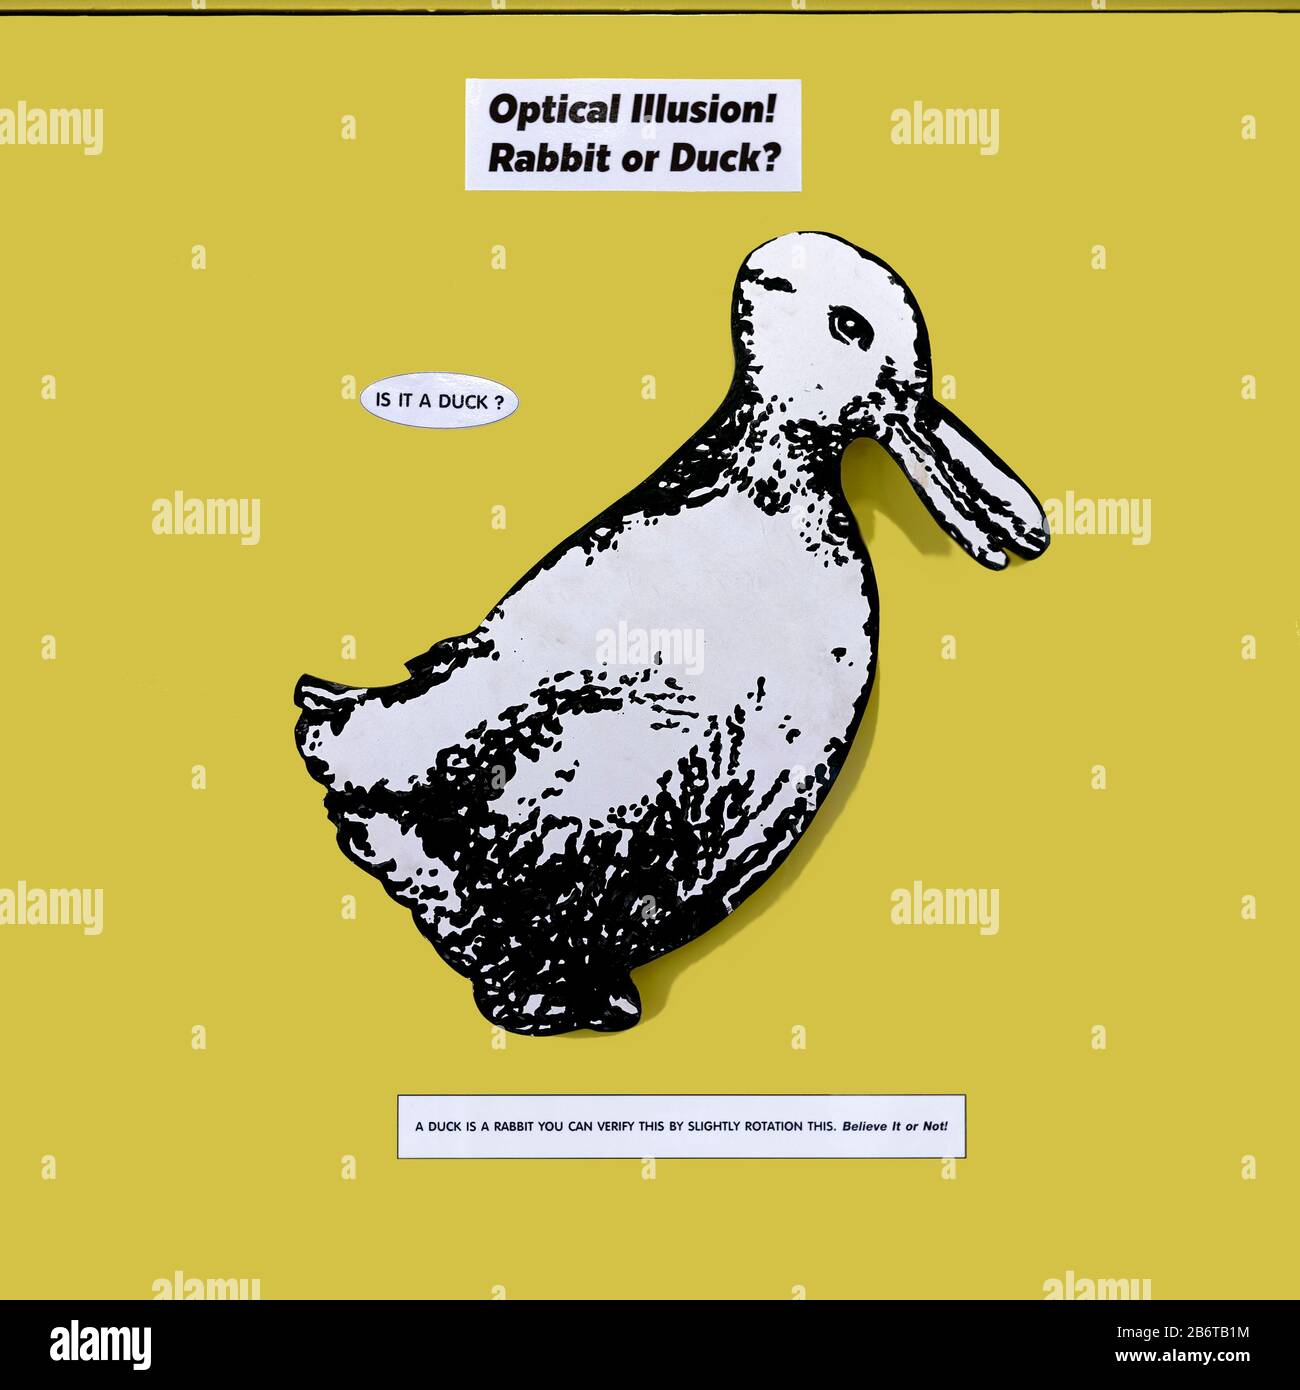 Optical illusion and trick art Illustration of an animal conversion to either a rabbit or a duck. Stock Photo